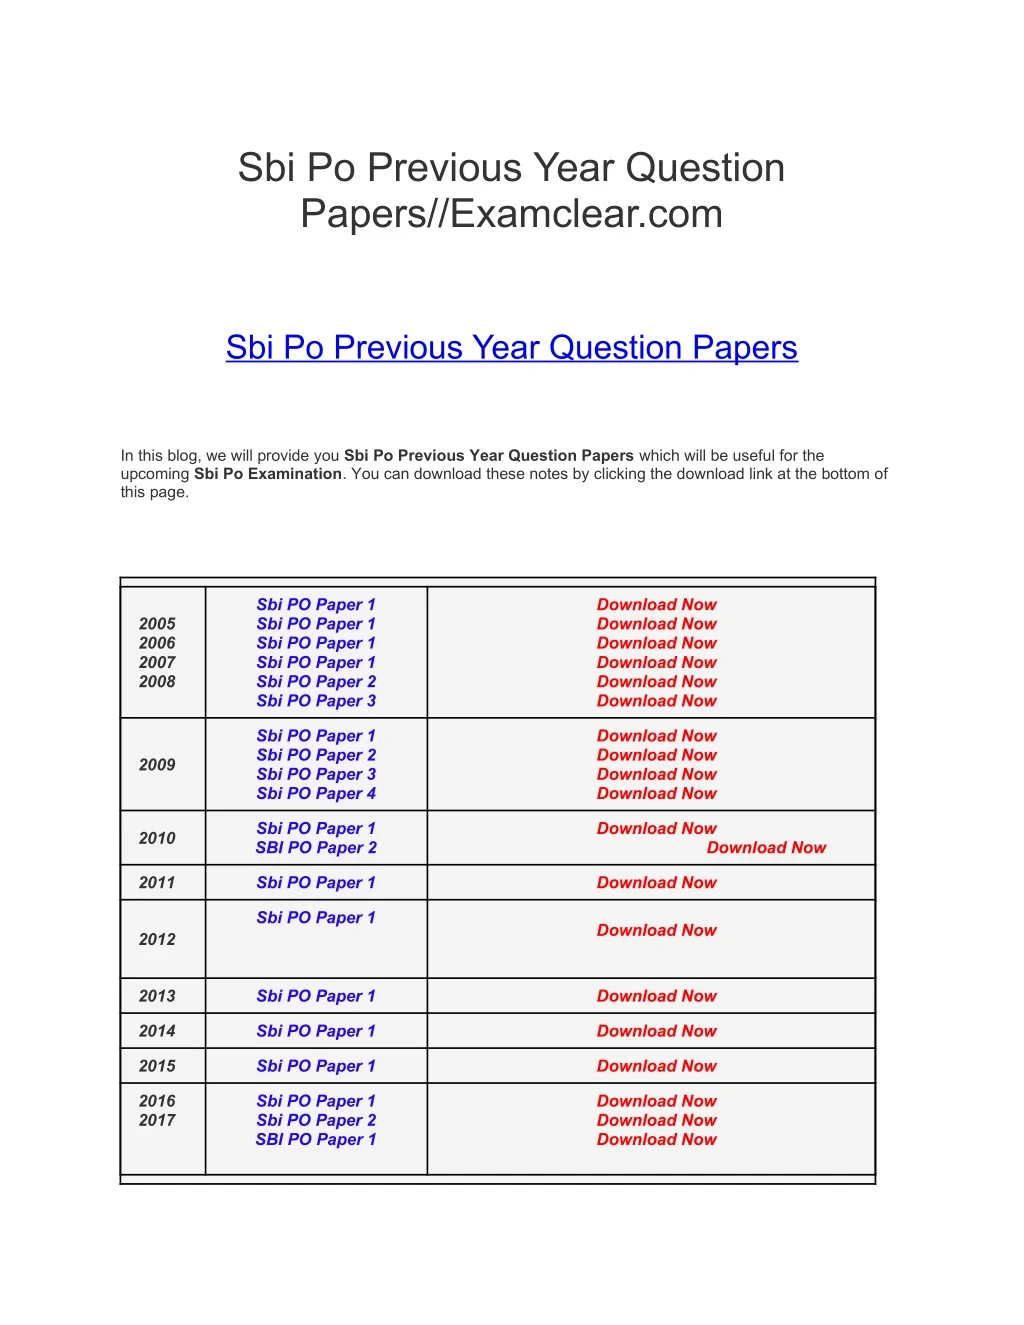 sbi po previous year question papers examclear com